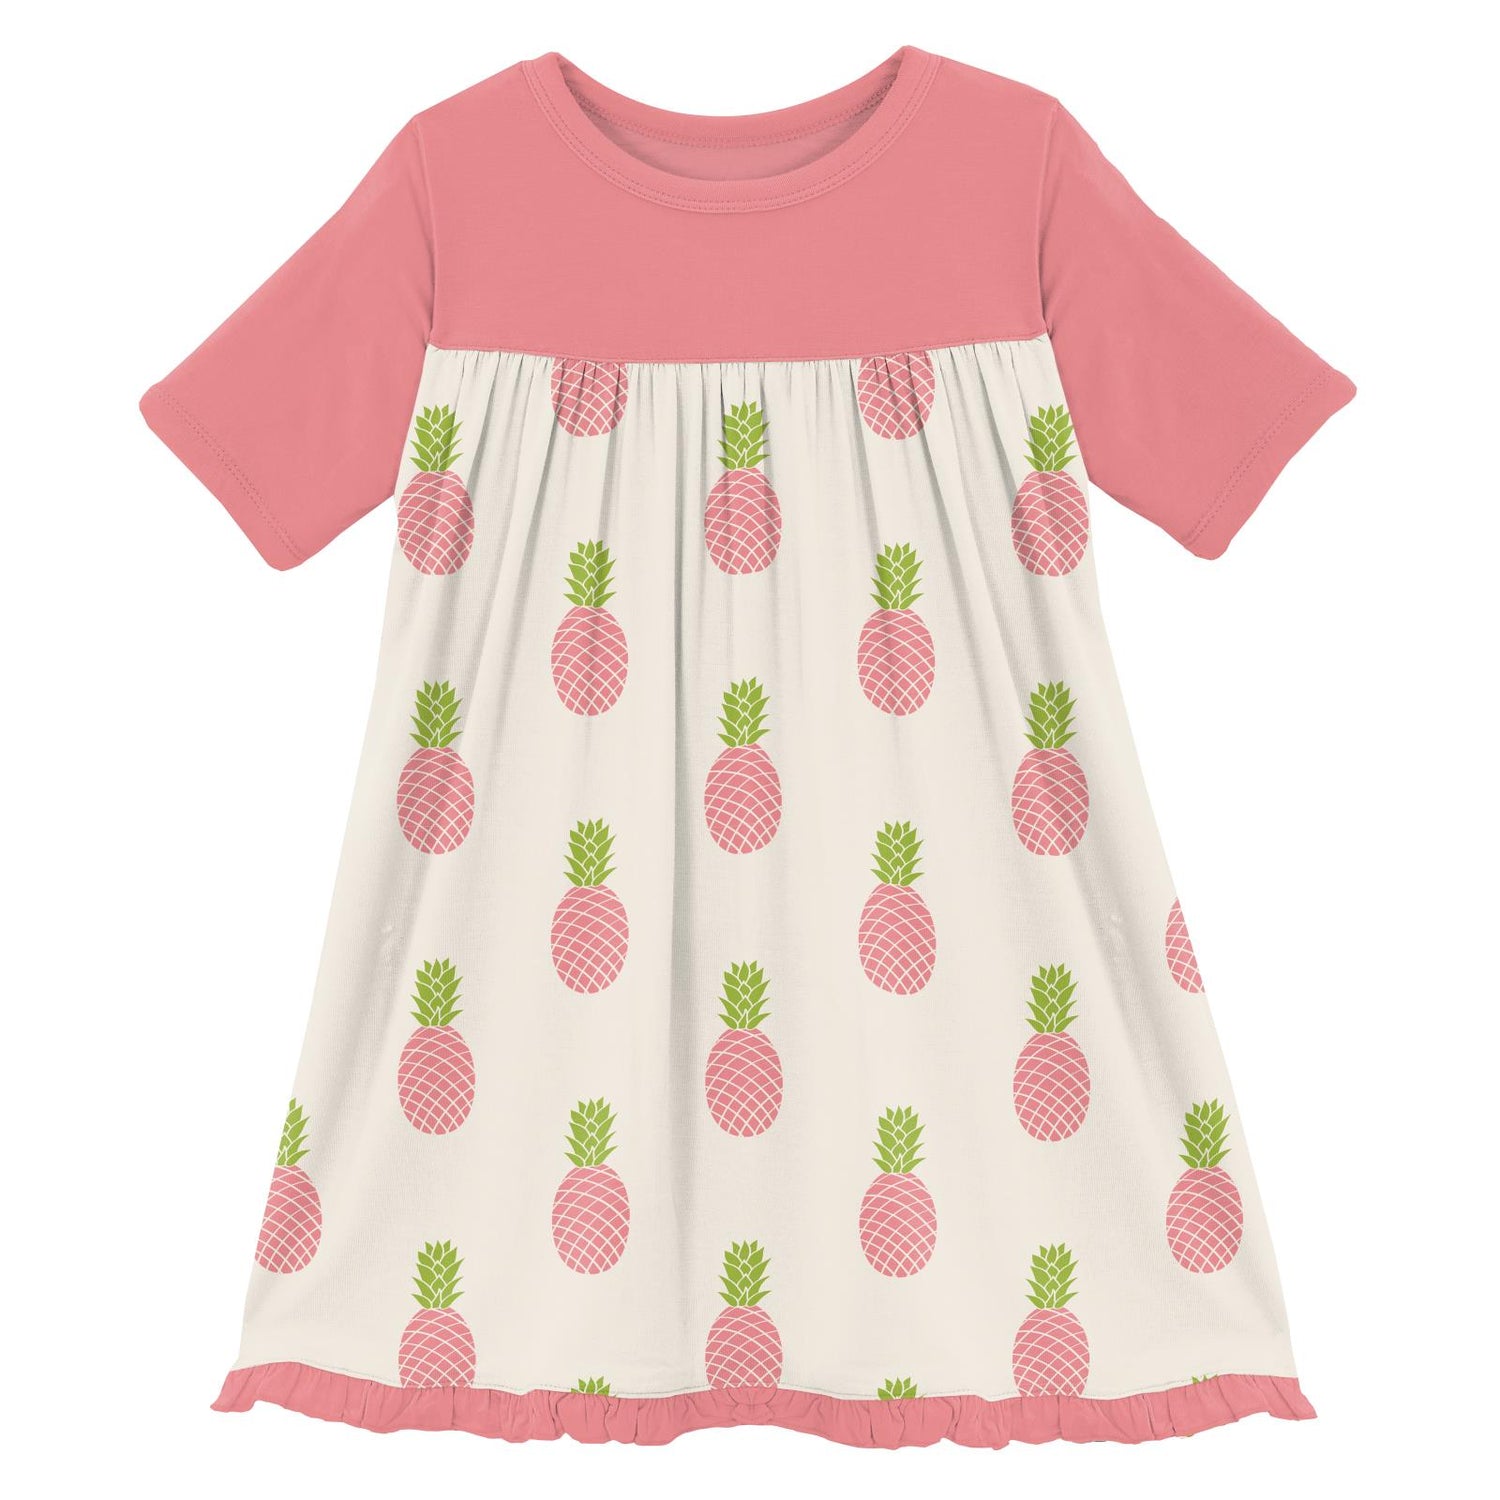 Print Classic Short Sleeve Swing Dress in Strawberry Pineapples